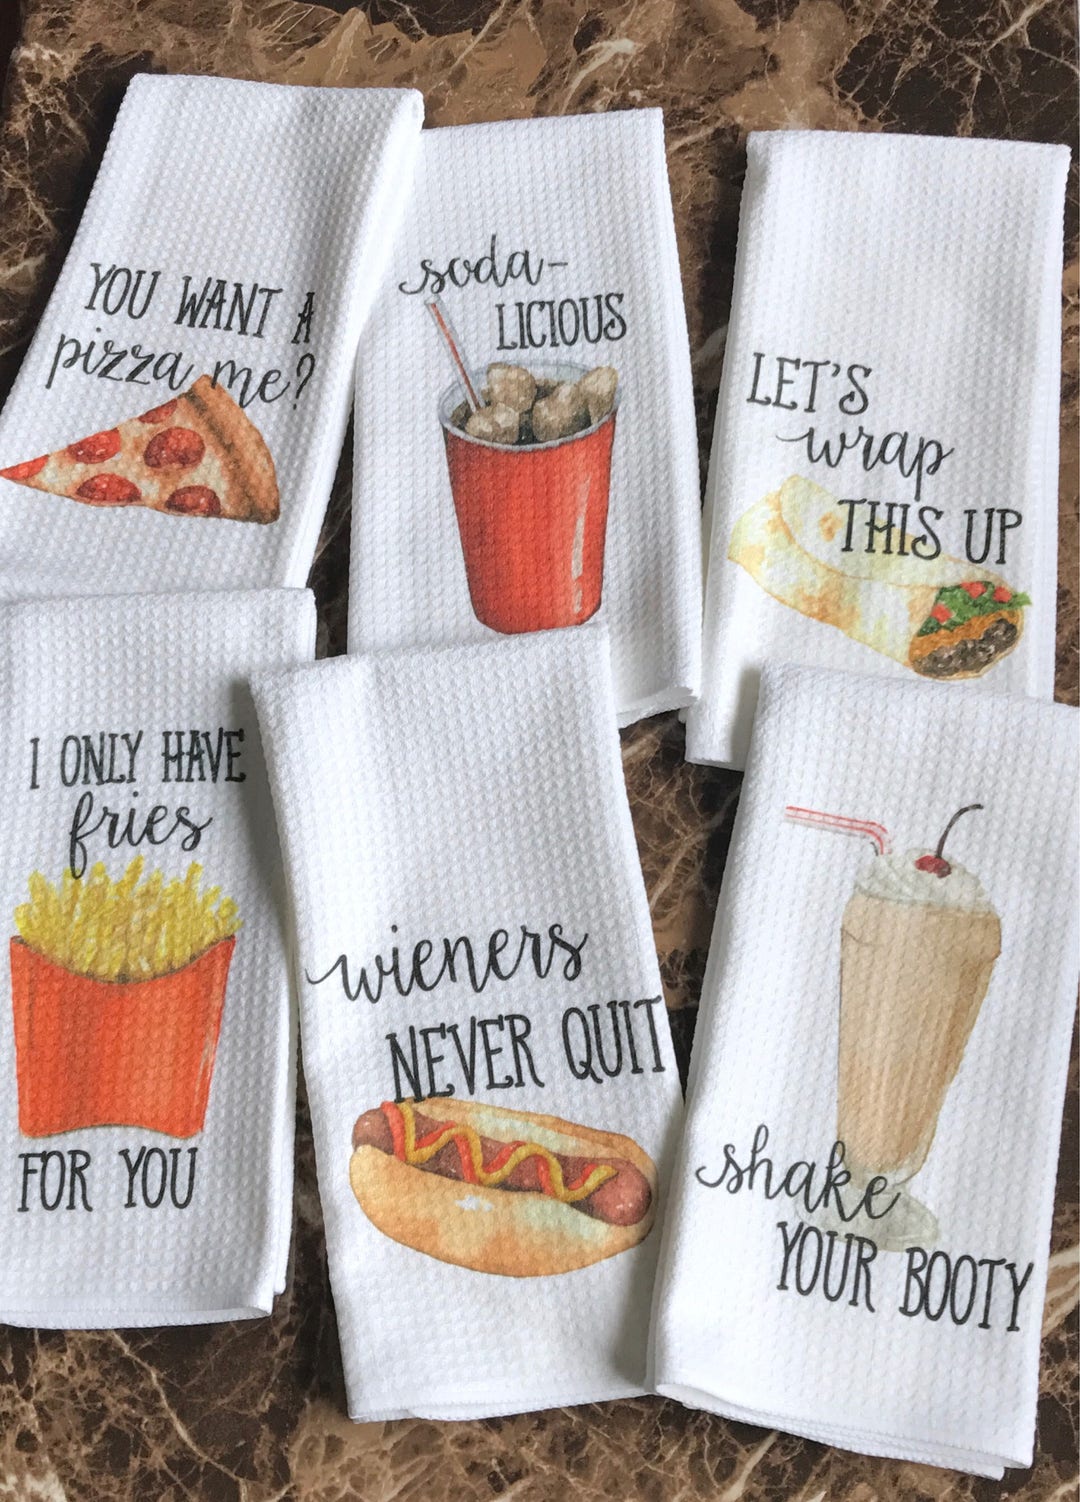 Lavley Funny Kitchen Towels with Sayings - Colorful Kitchen Decor Novelty  Gift (Baking Spirits Bright)